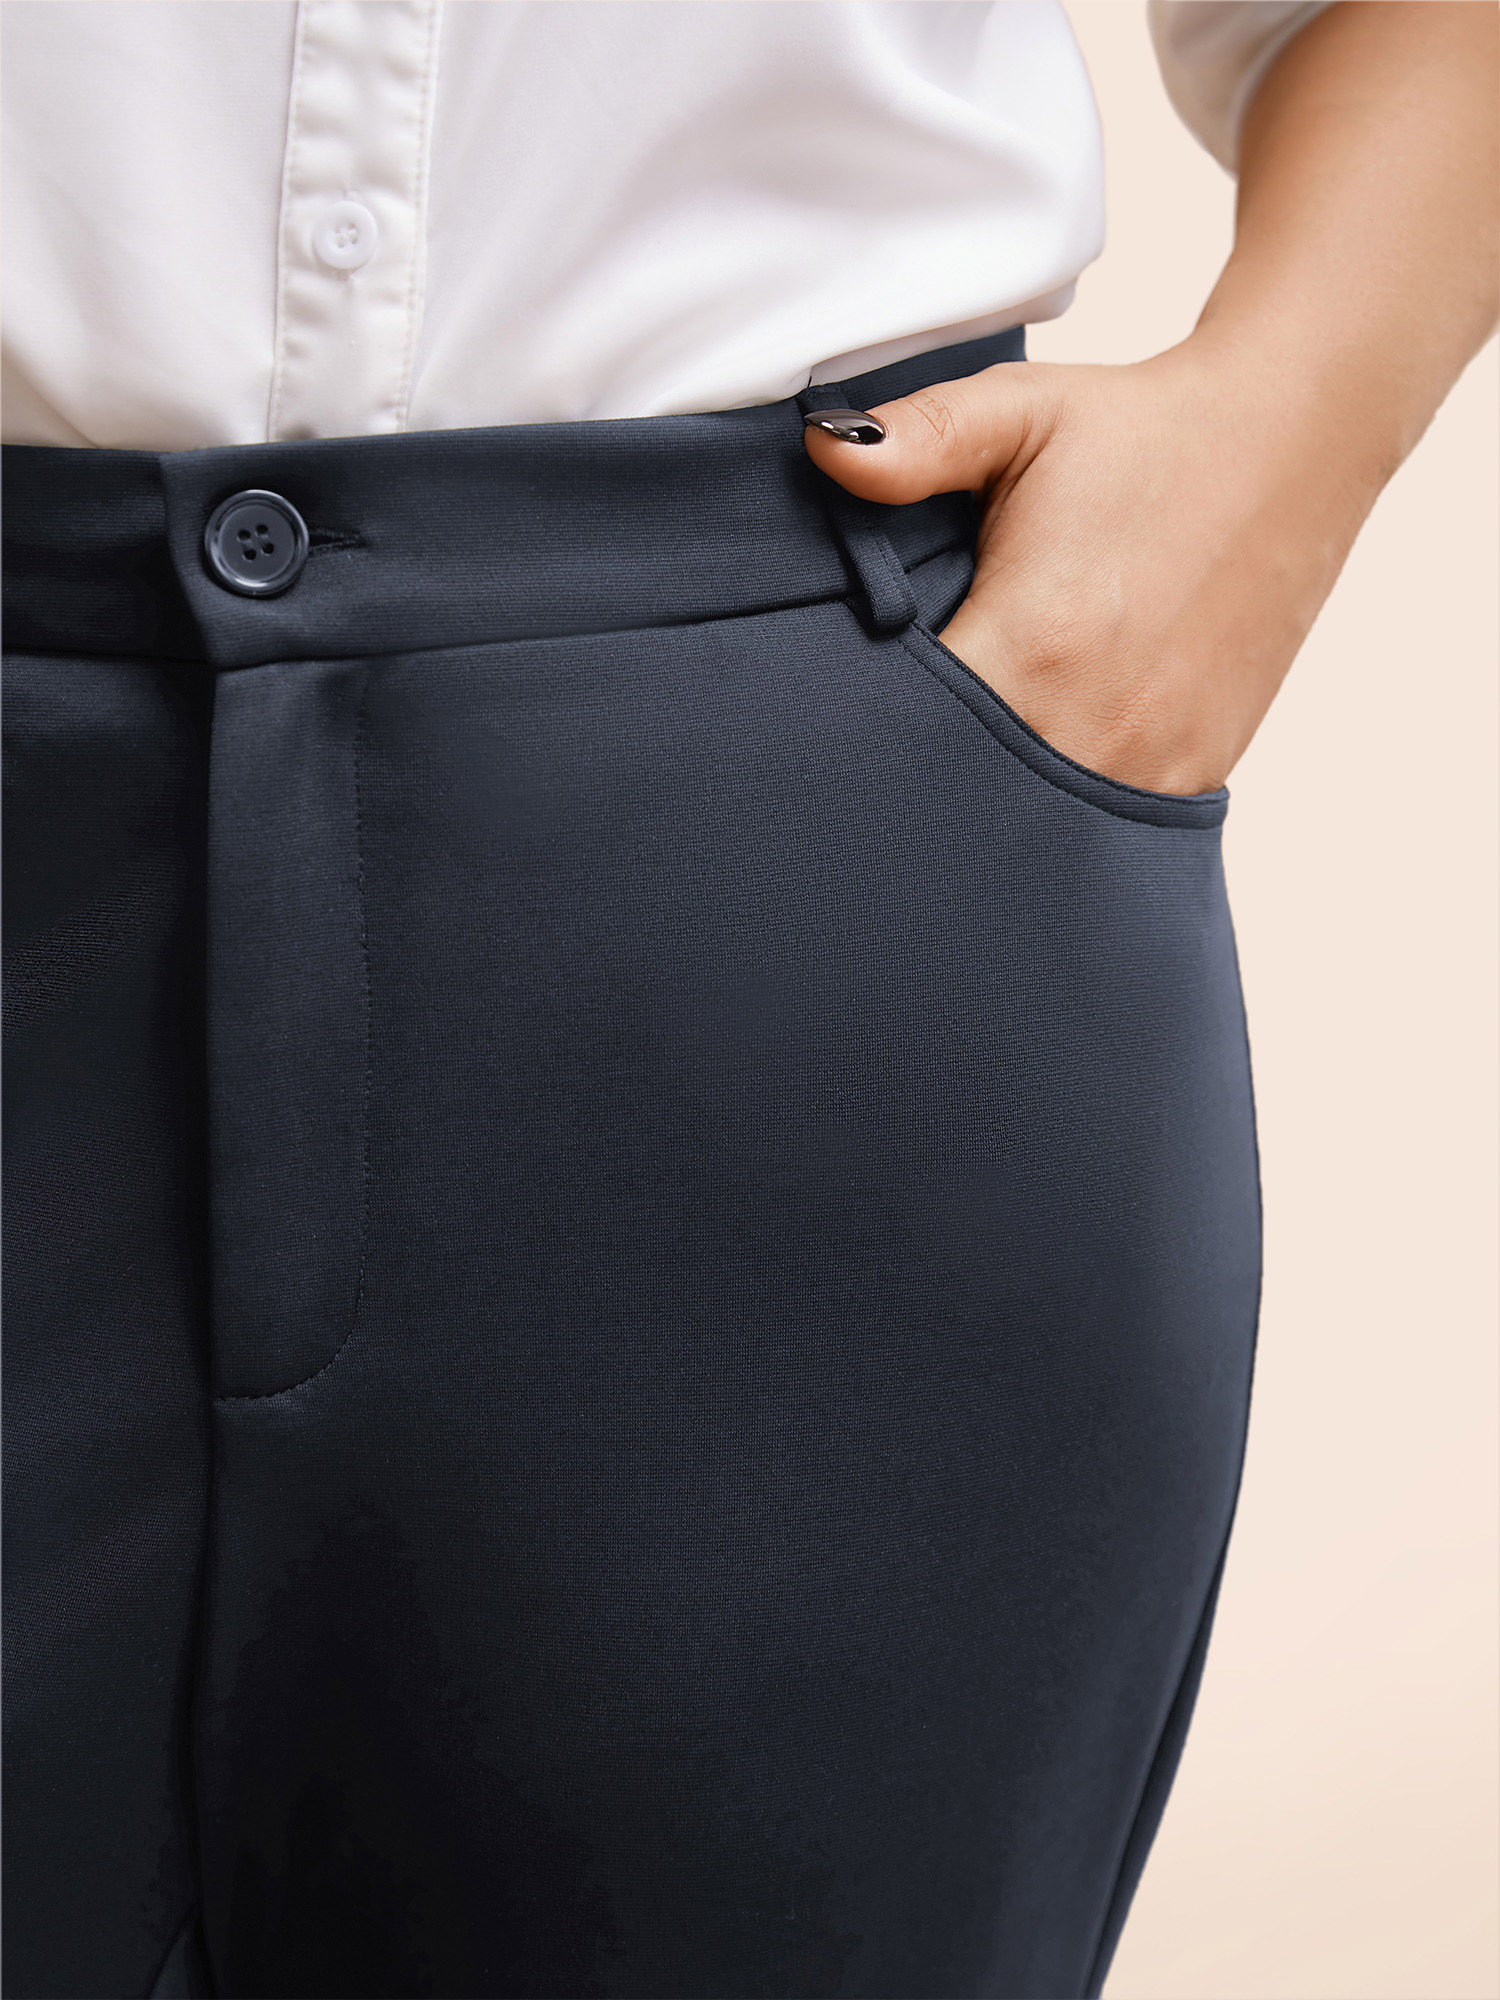 

Plus Size Stretchy-Fit Pocket Elastic Waist Pants Women Indigo At the Office Bodycon High Rise Work Pants BloomChic